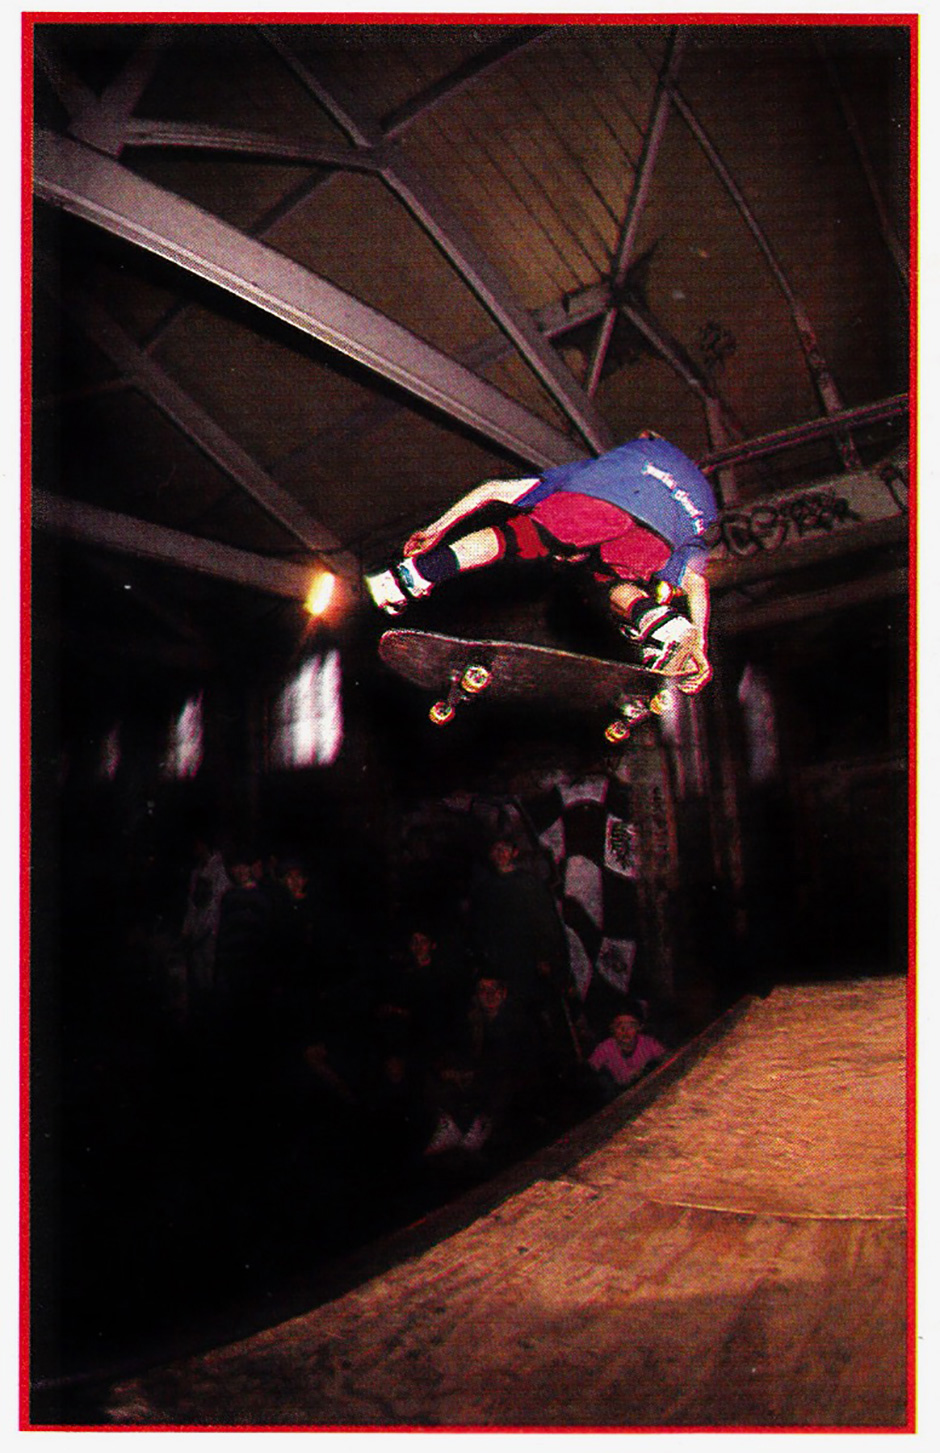 Olly Todd's first published photo at Barrow Skate Shack, a one foot tail grab shot in practise by TLB